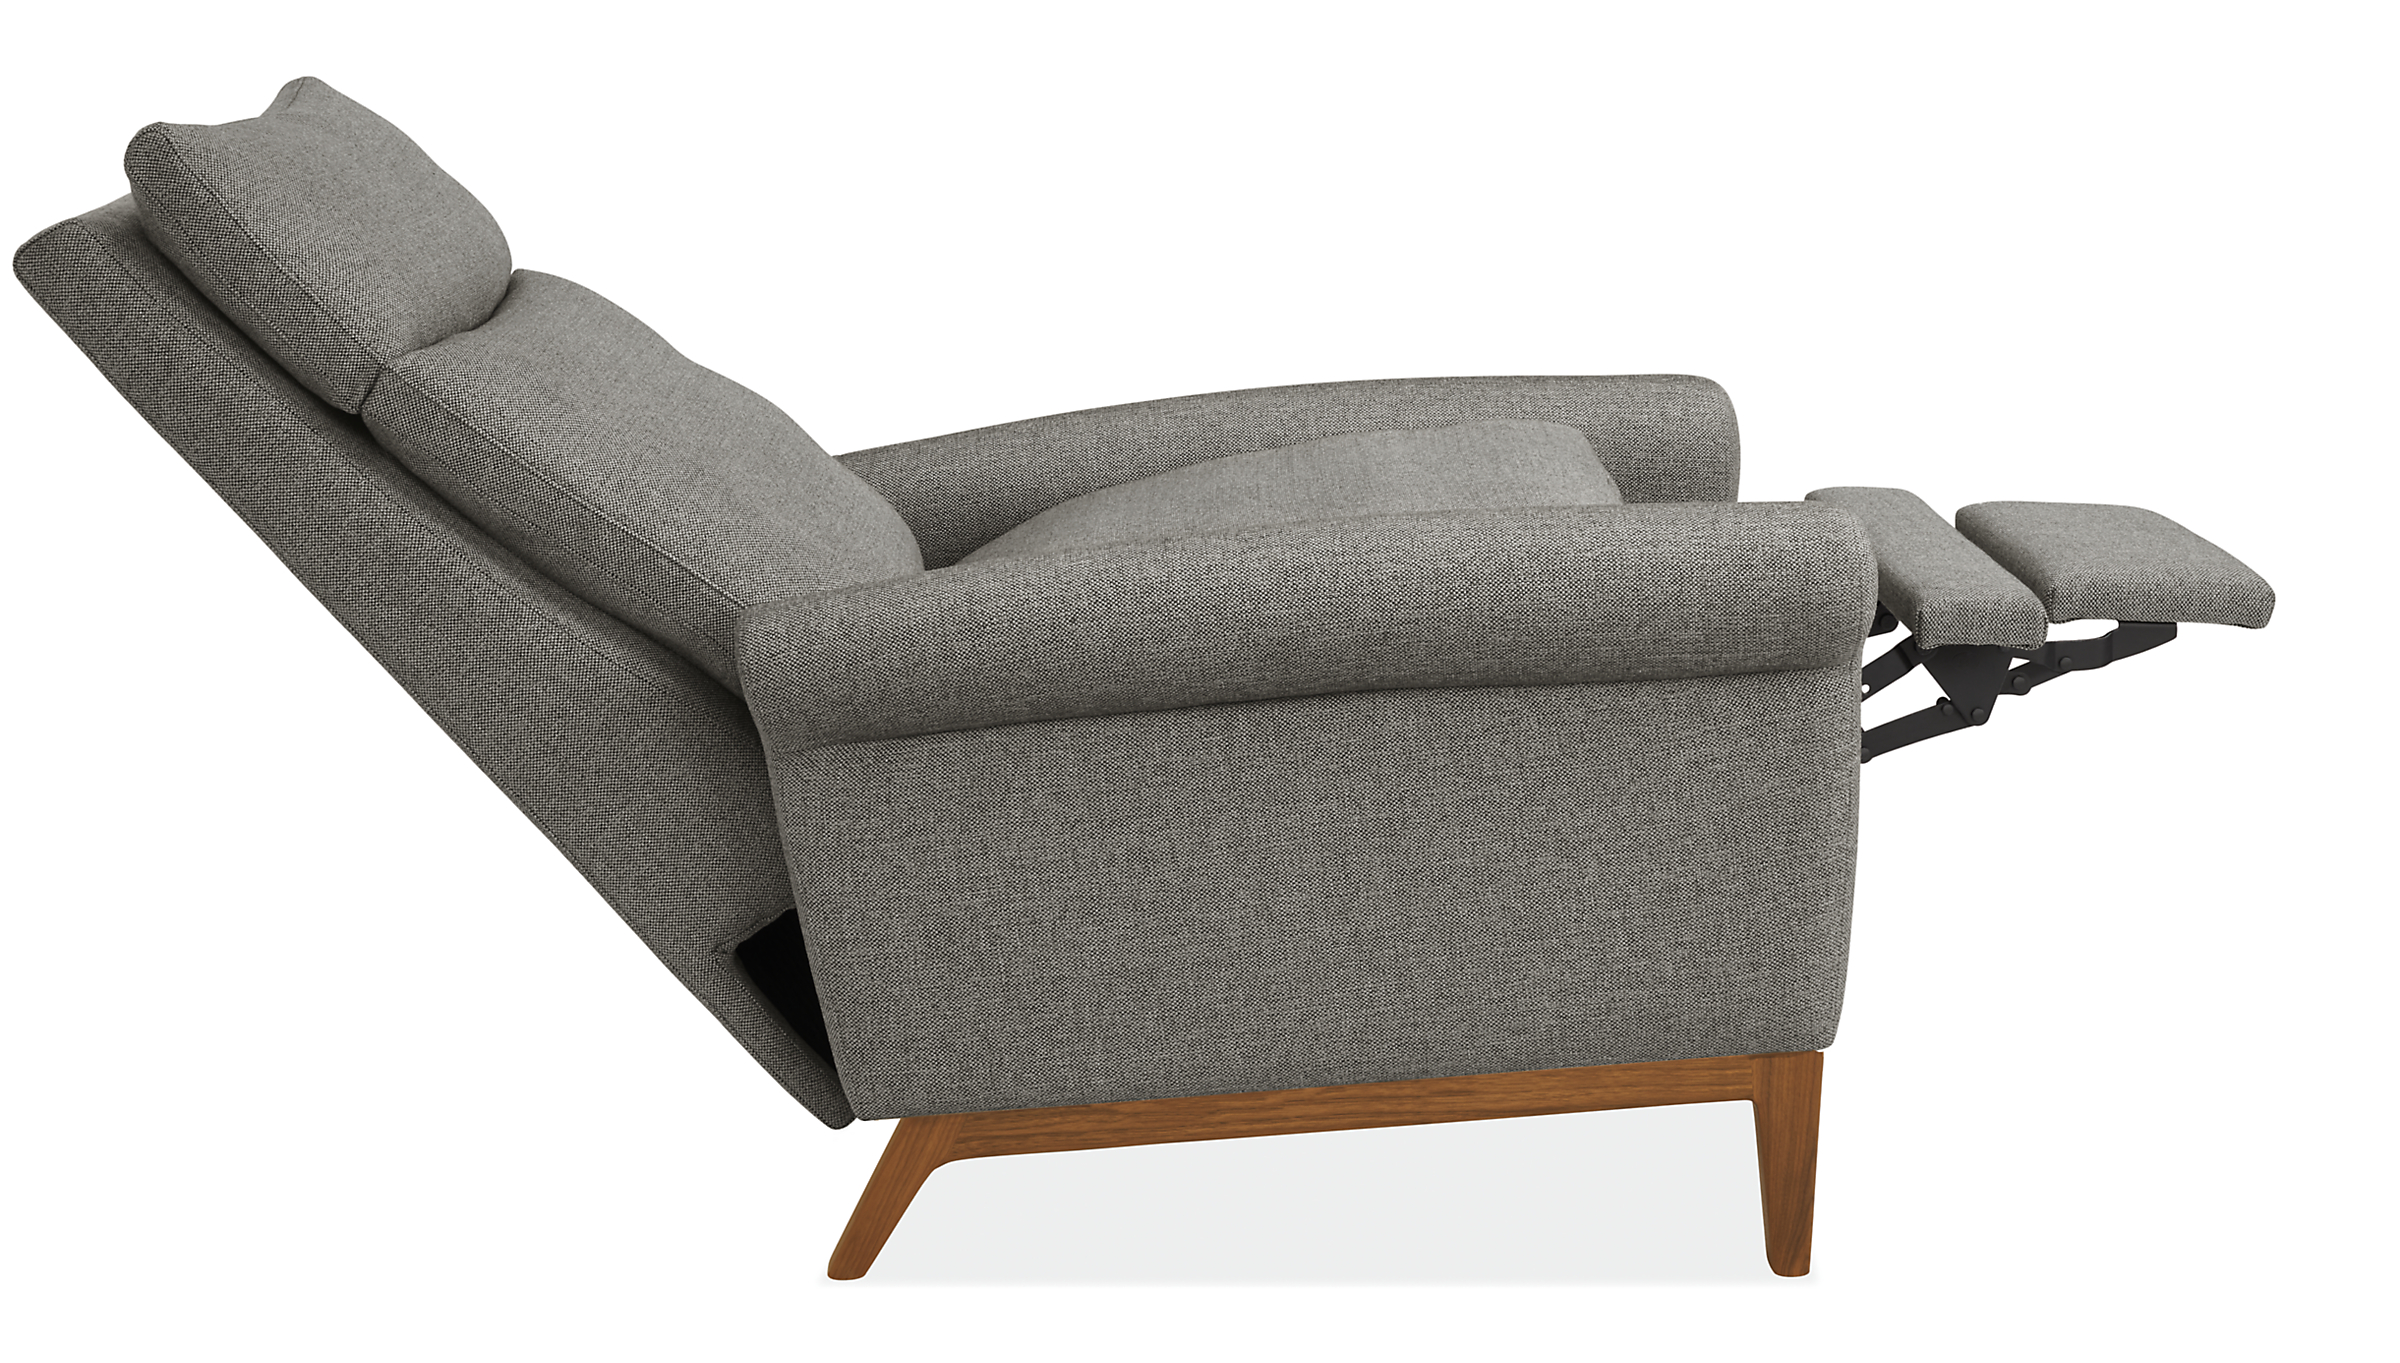 Open detail of Isaac Select Recliner Rolled-Arm in Sumner Fabric with Wood Base.